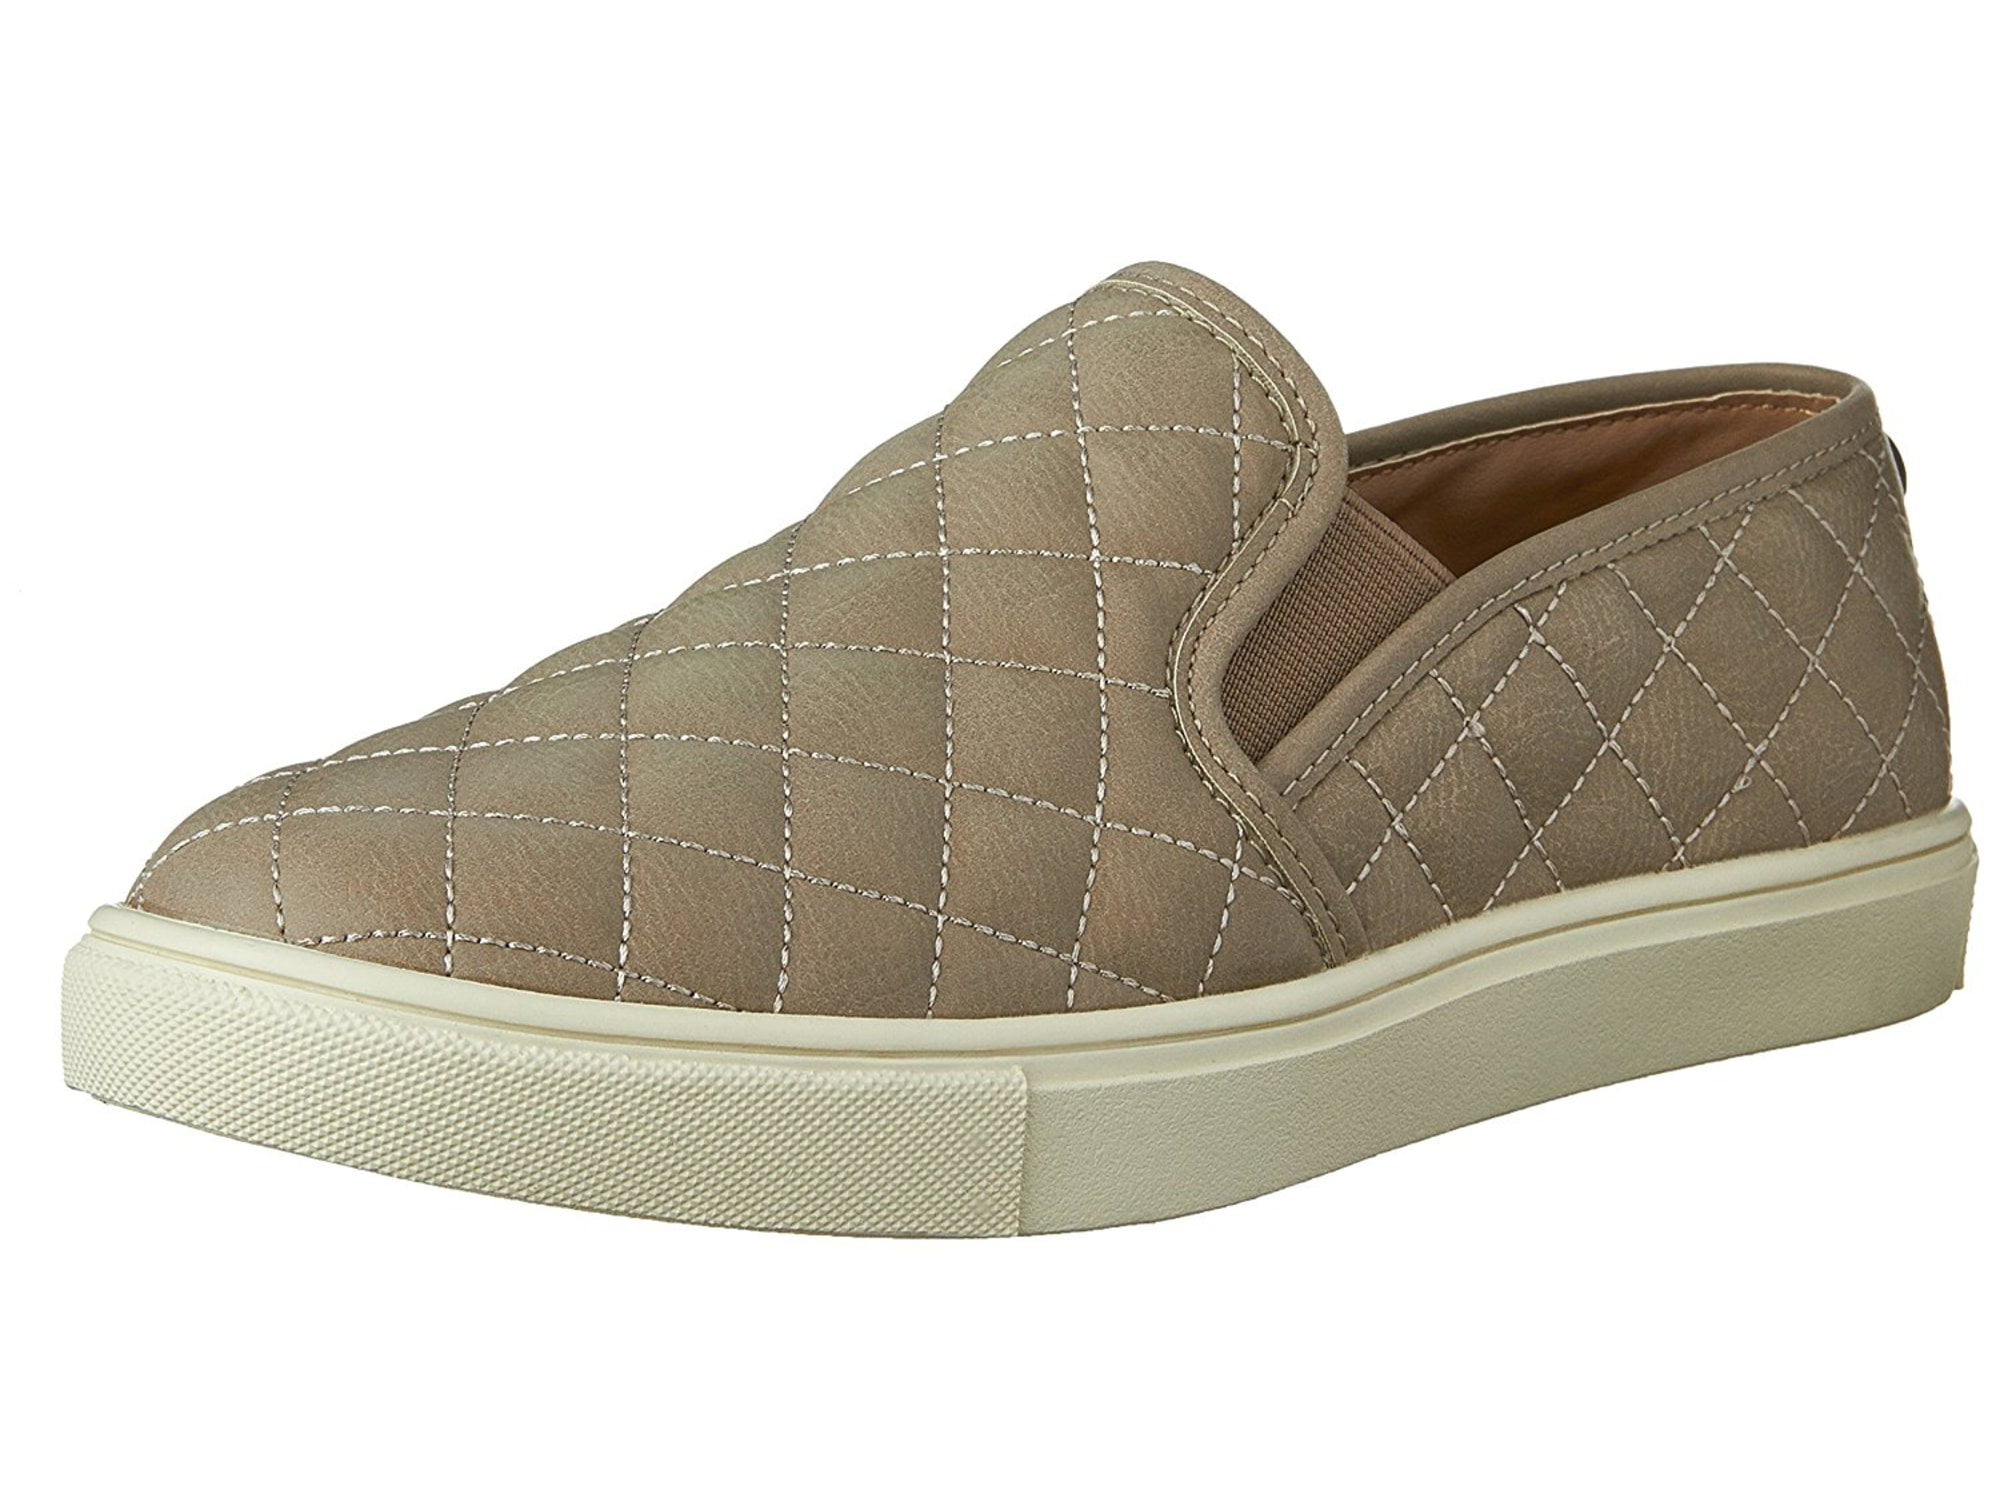 quilted leather slip on sneakers